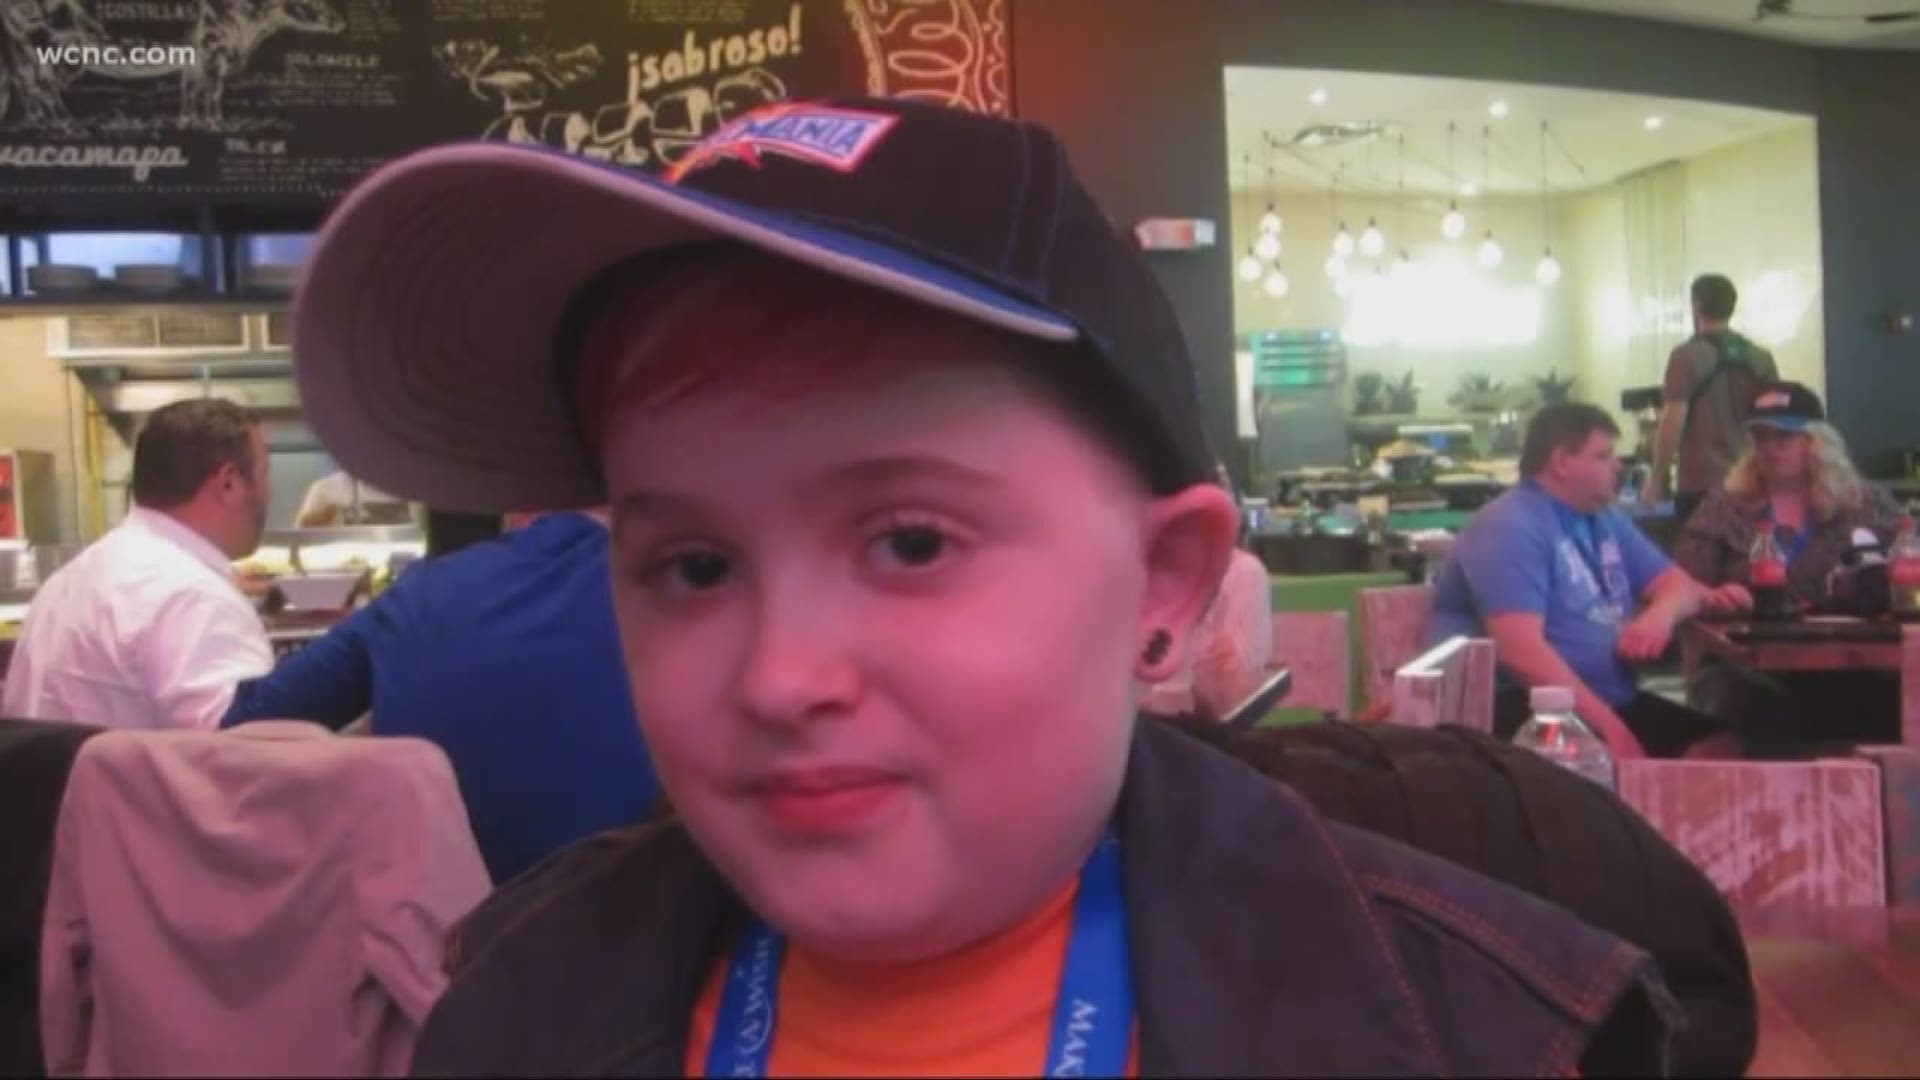 Sunday is World Wish Day. The Make-A-Wish Foundation sent a local boy to meet his hero, wrestling icon John Cena.